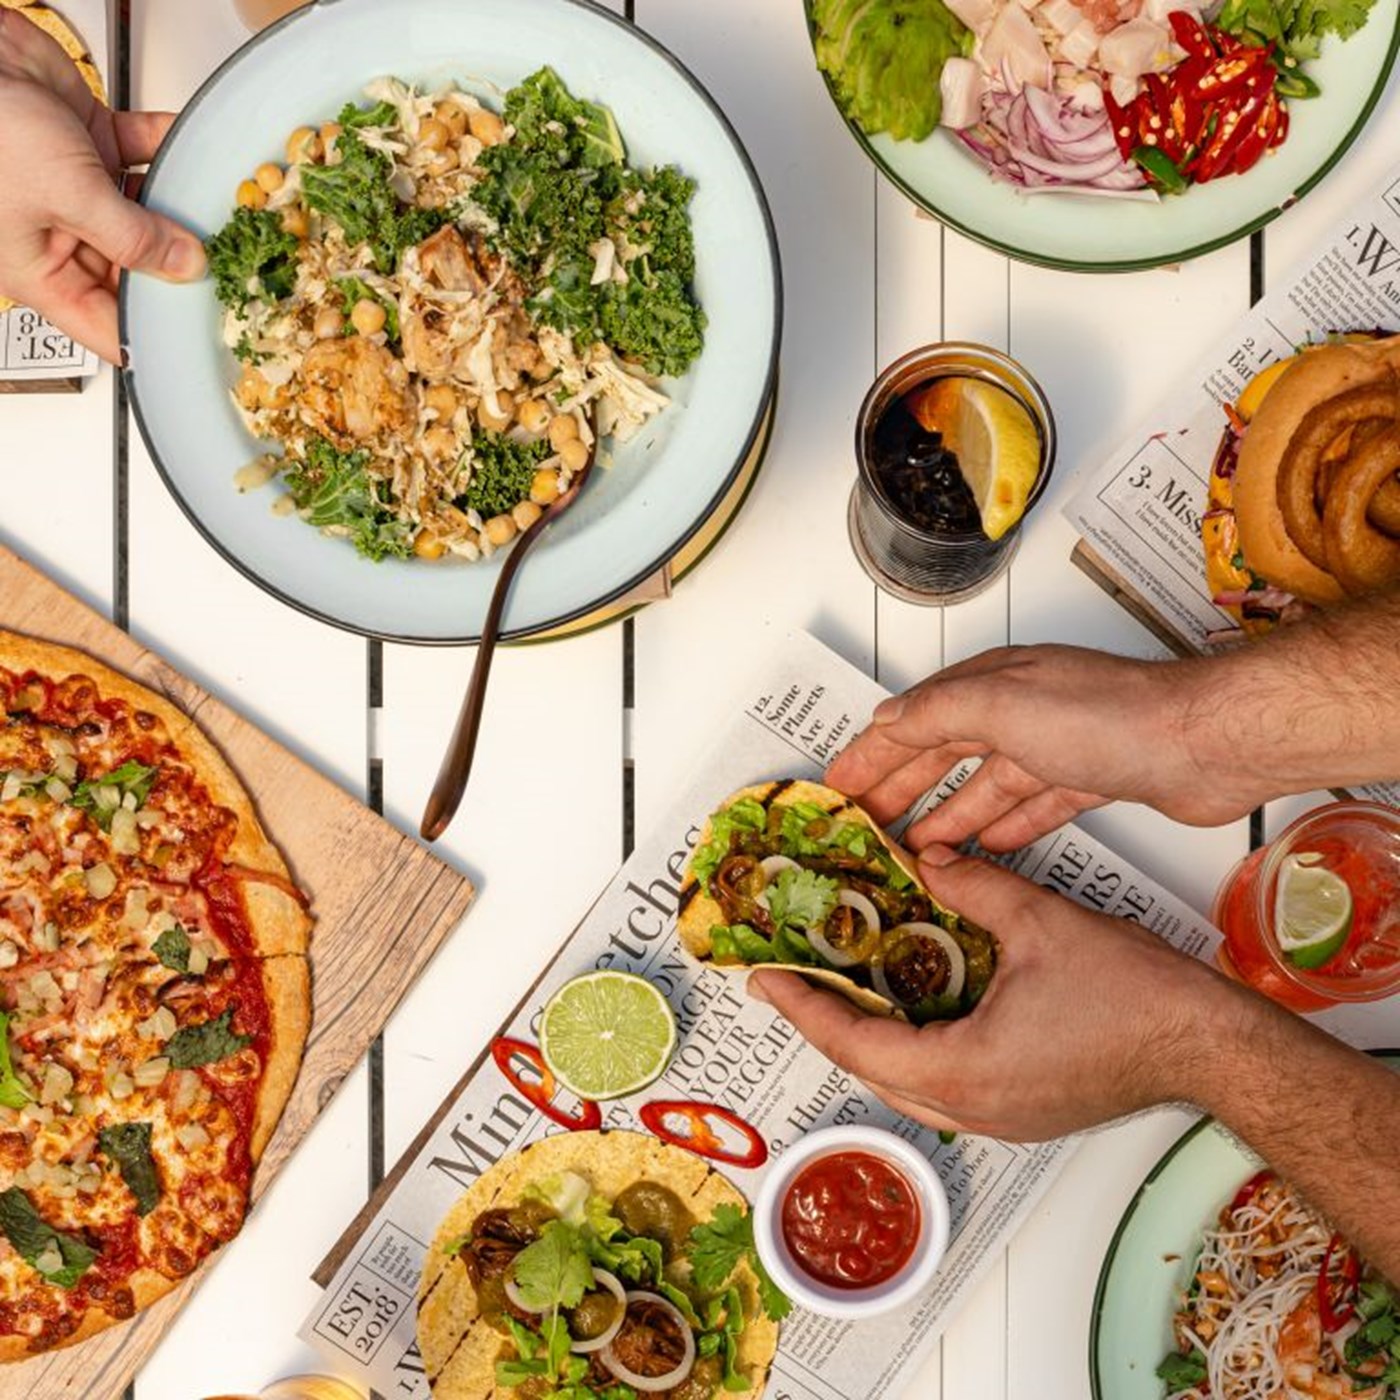 Top down view of a white table with hands reaching for share tacos, pizza and salads